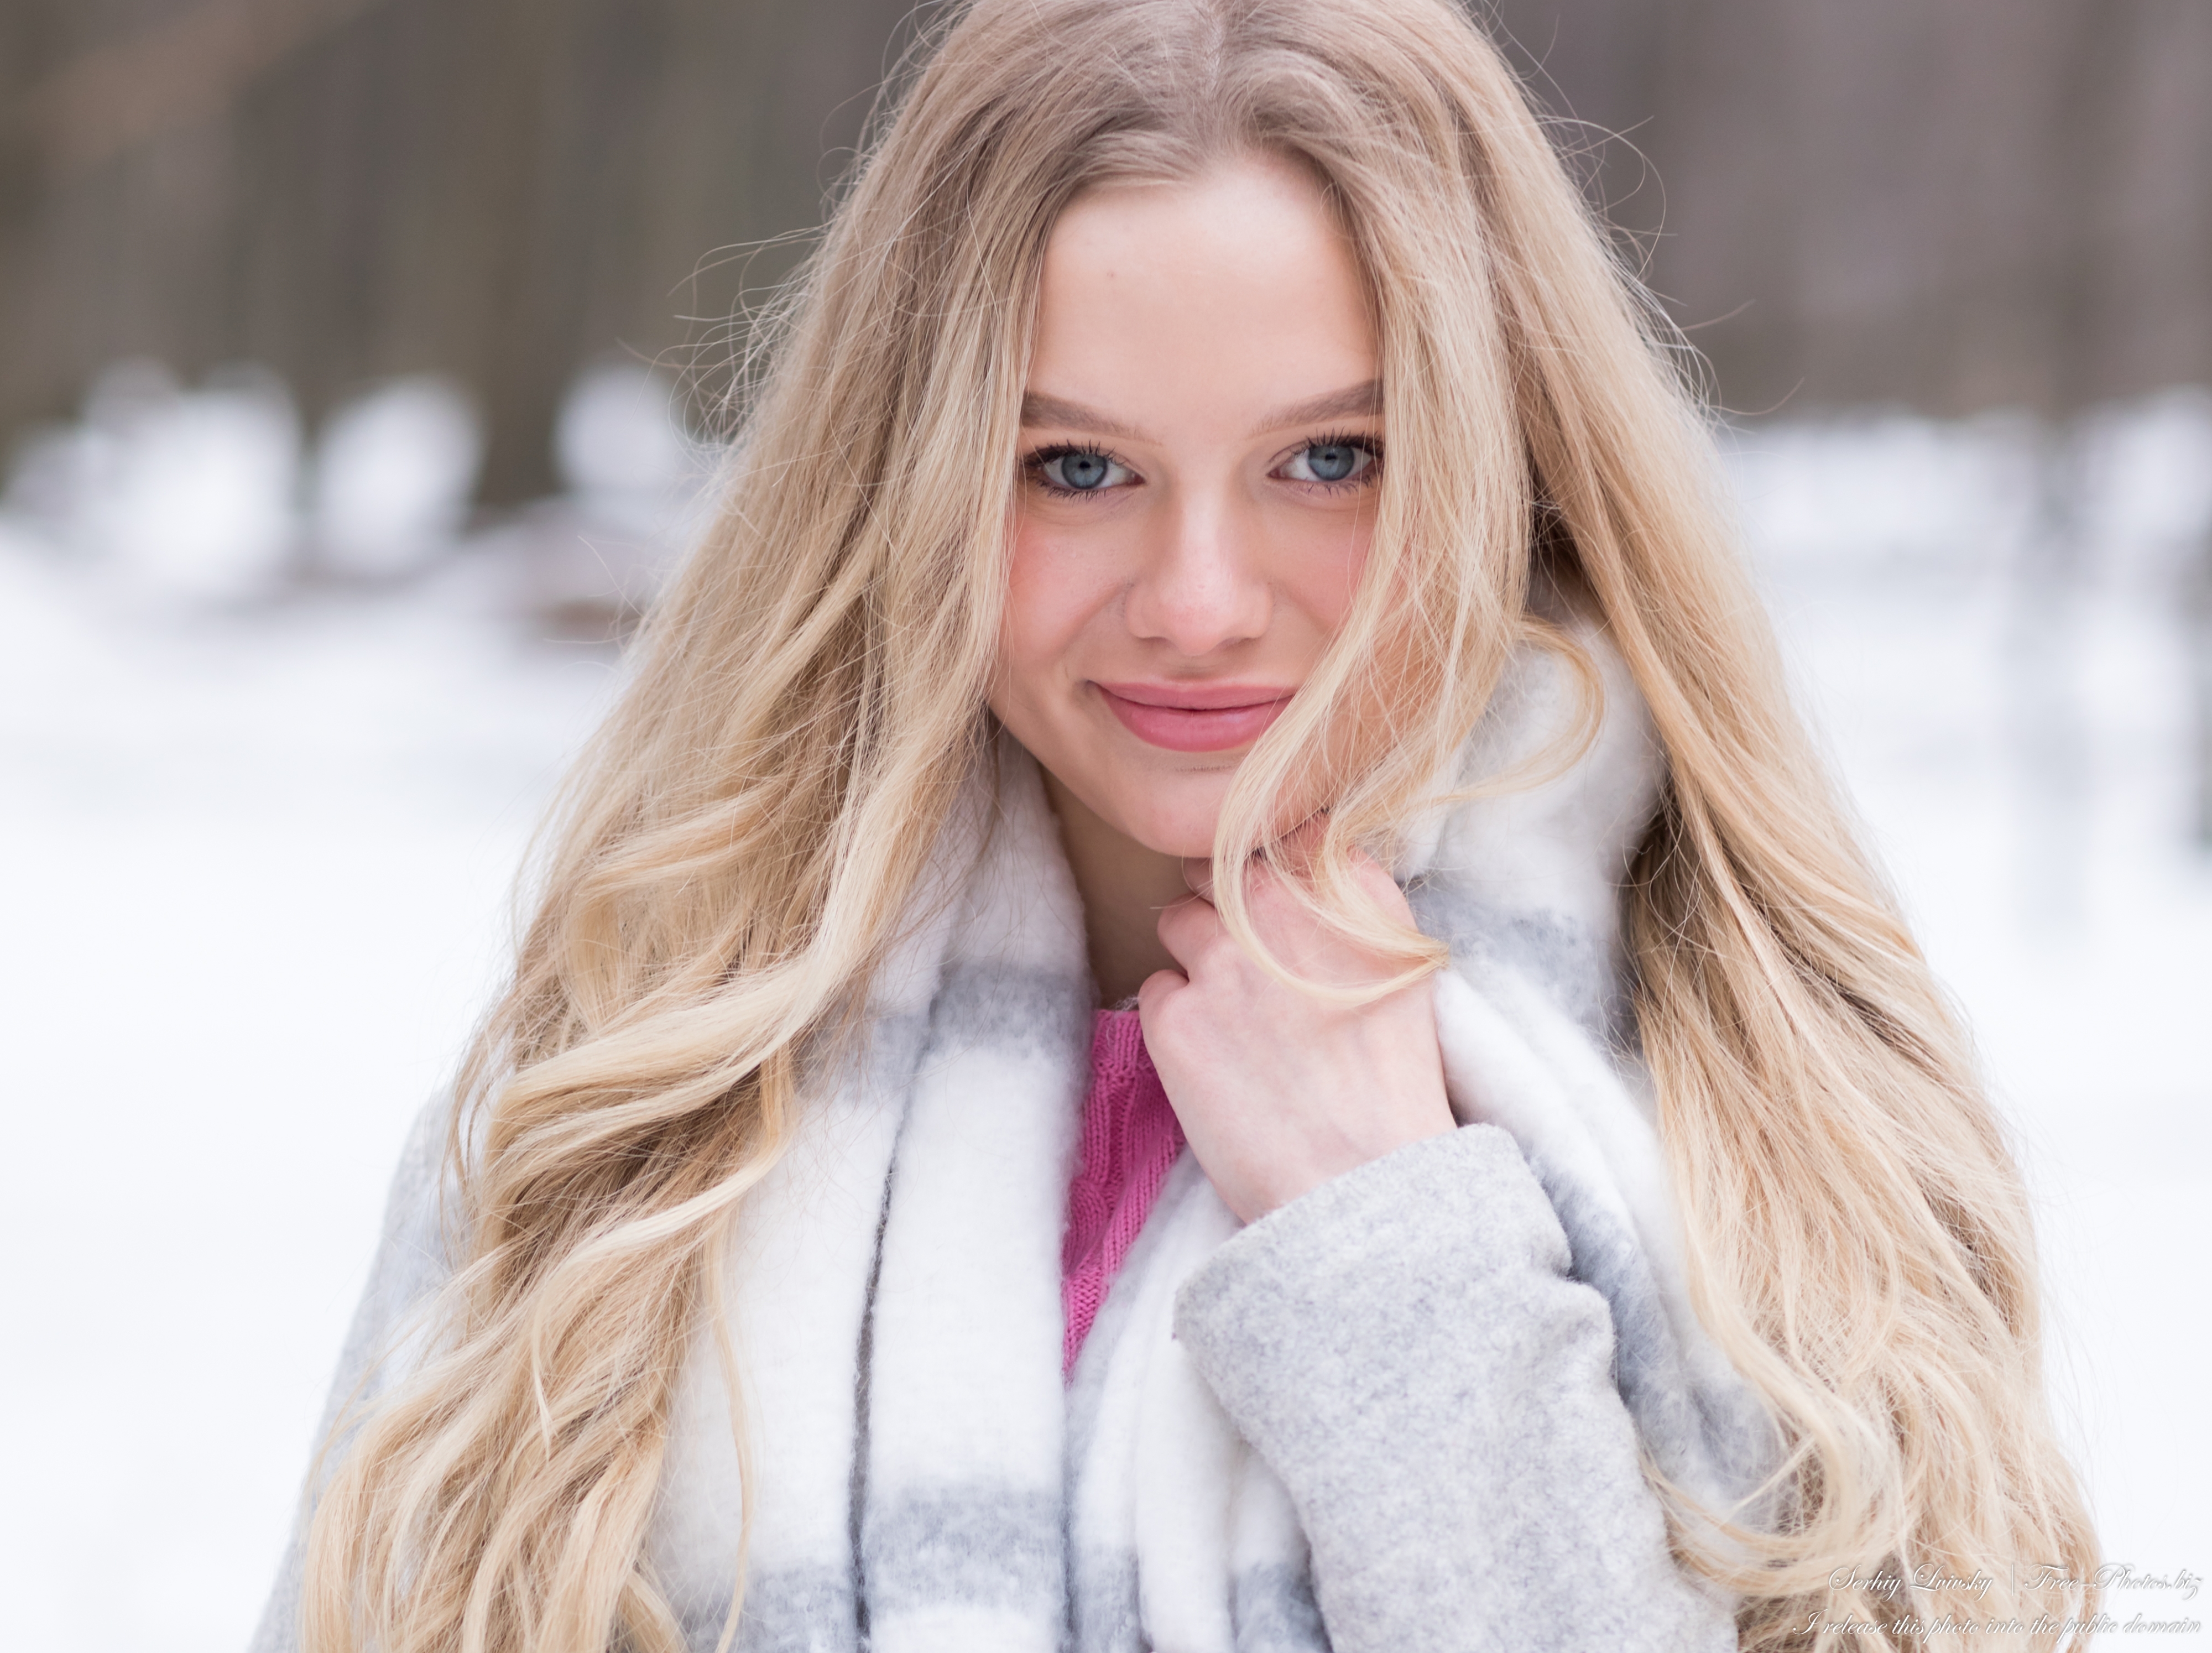 oksana_a_19-year-old_natural_blonde_girl_photographed_by_serhiy_lvivsky_in_march_2021_33